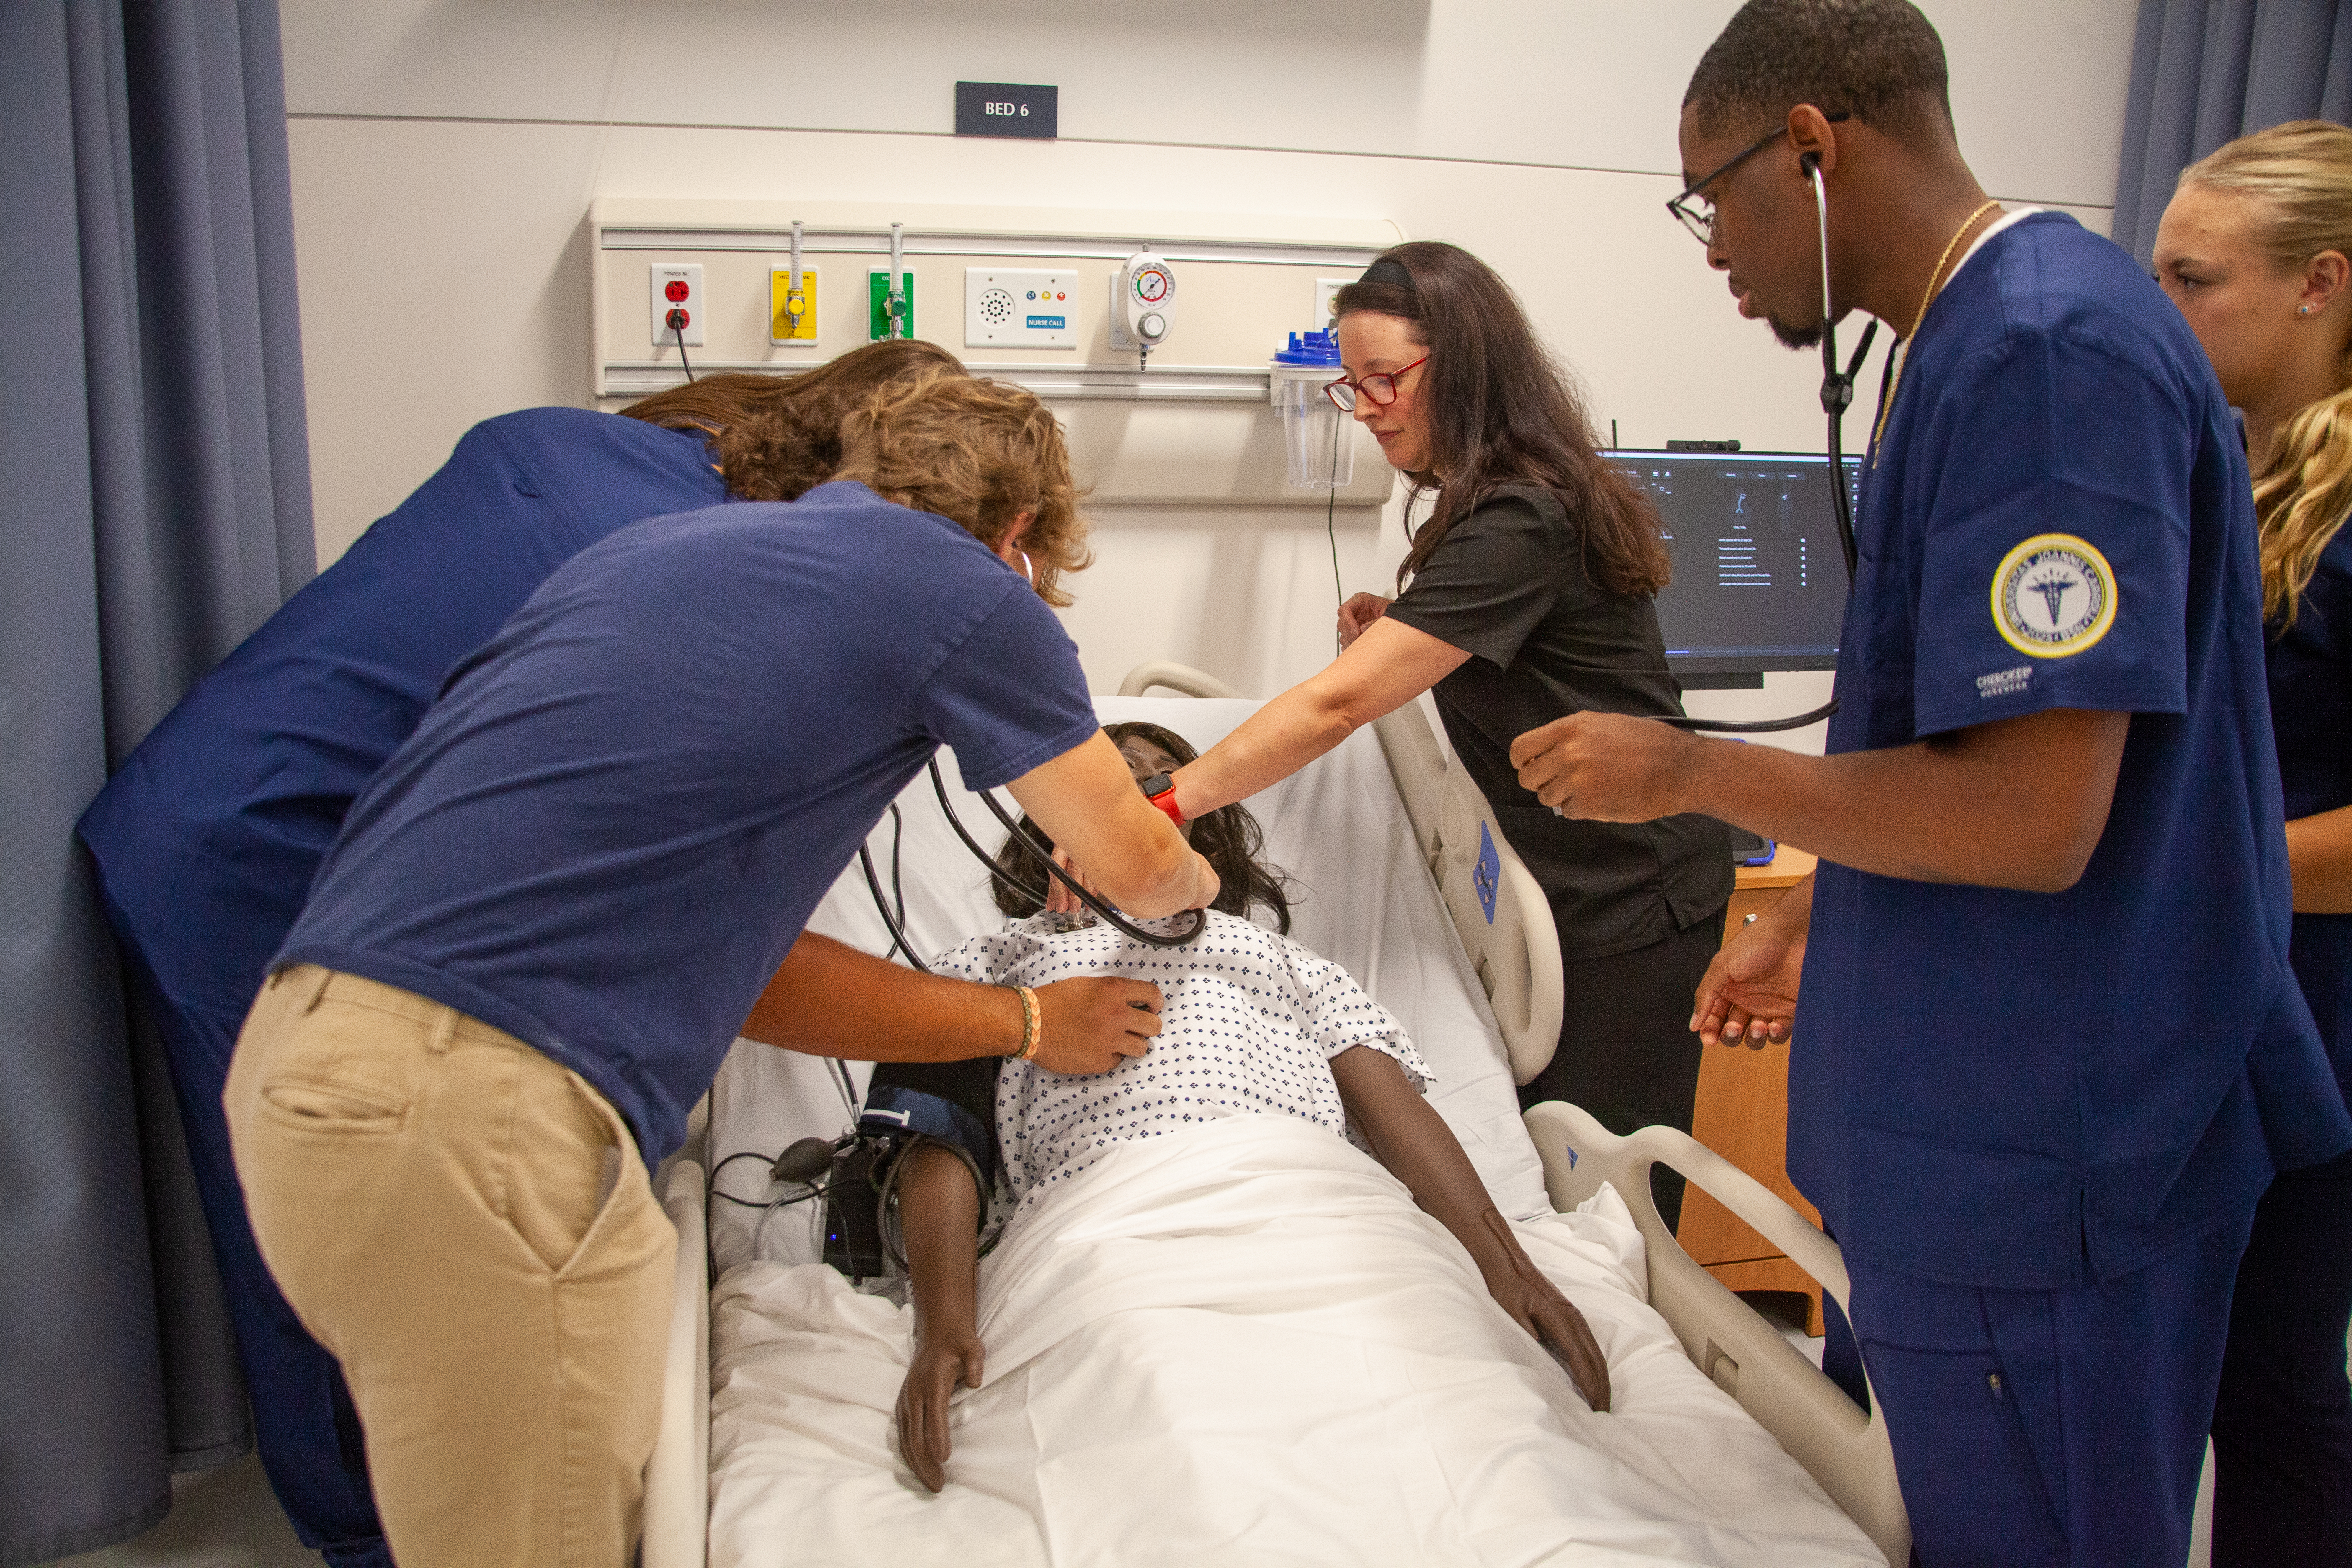 Nursing students learning with medical manniquin